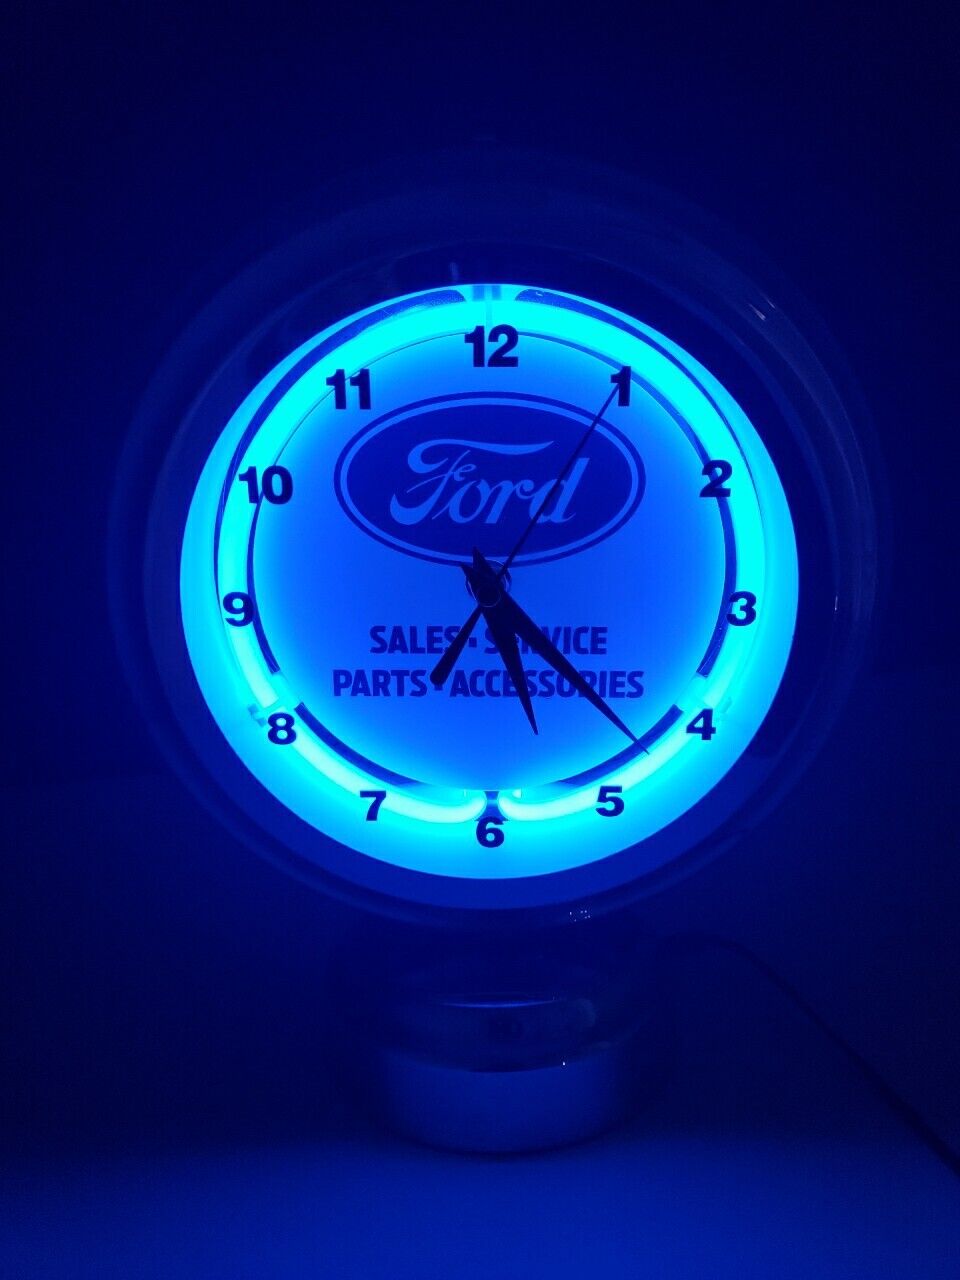 Ford Authorized Sales & Service Tabletop Neon Clock - 2013 - Works